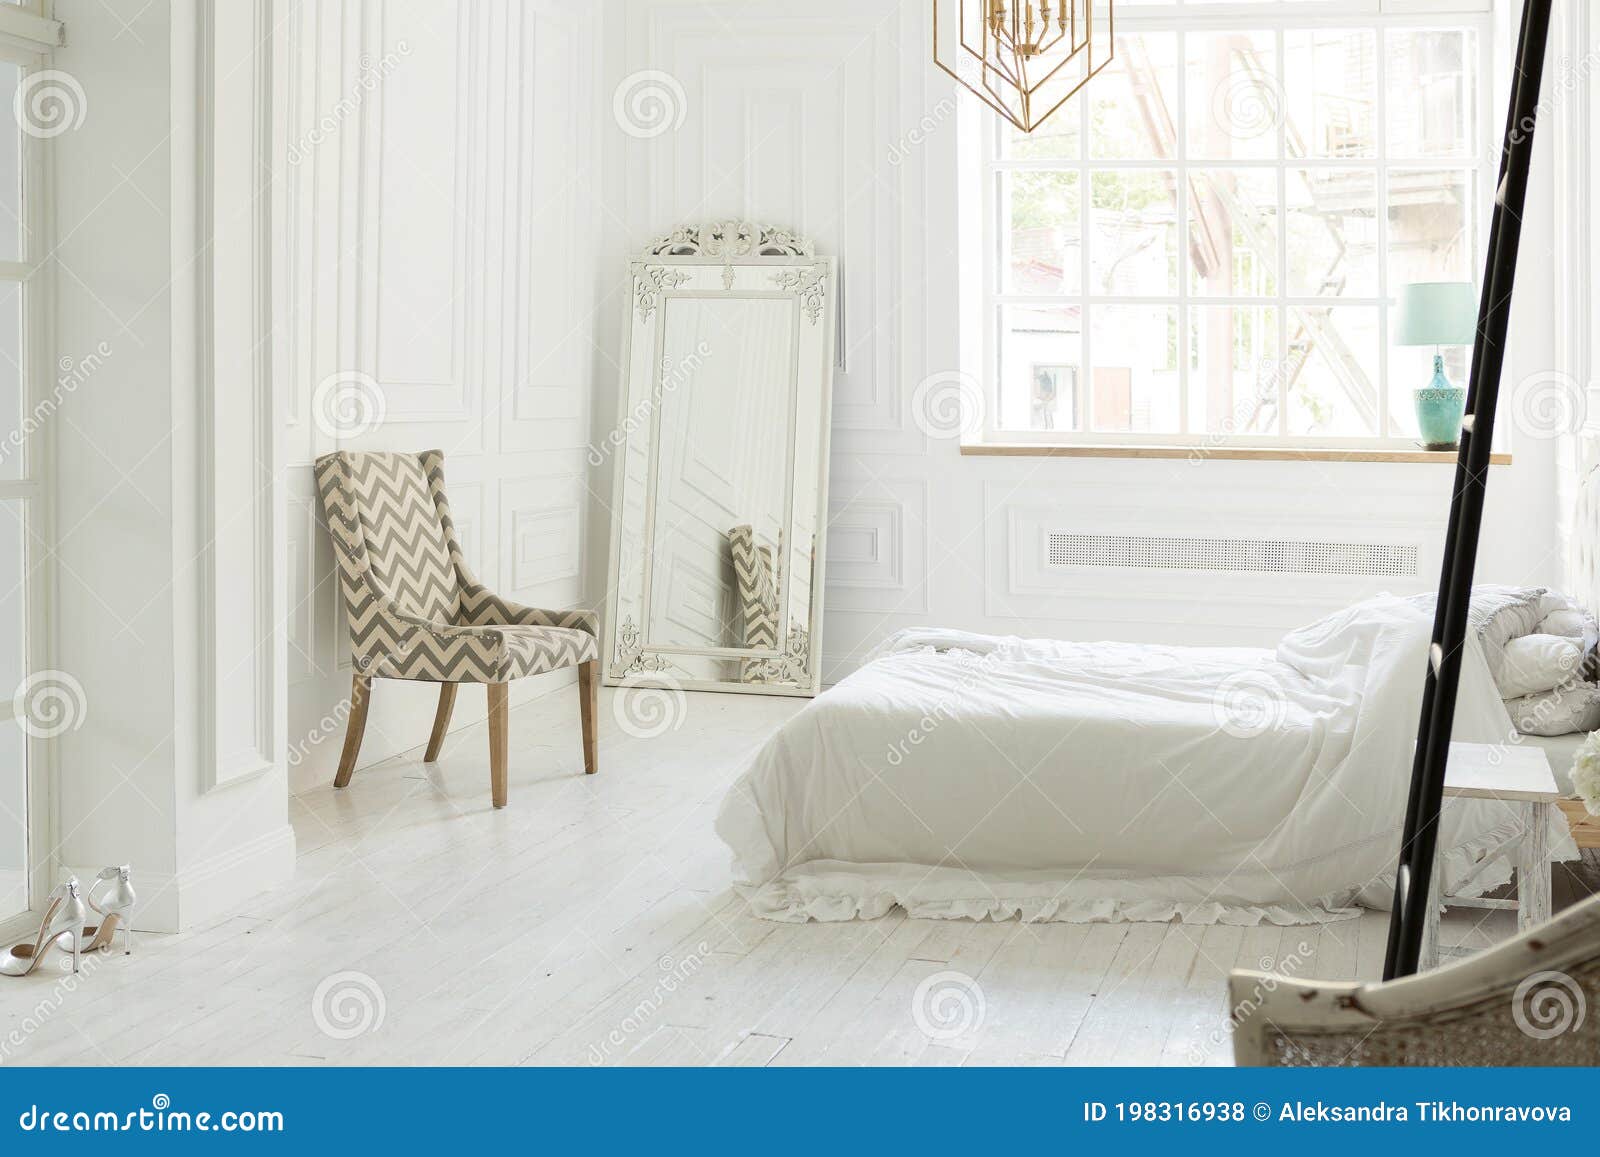 Luxury White Bedroom Interior Design In Soft Day Light With Elegant Classic Furniture Stock Photo Image Of Stylish Daylight 198316938